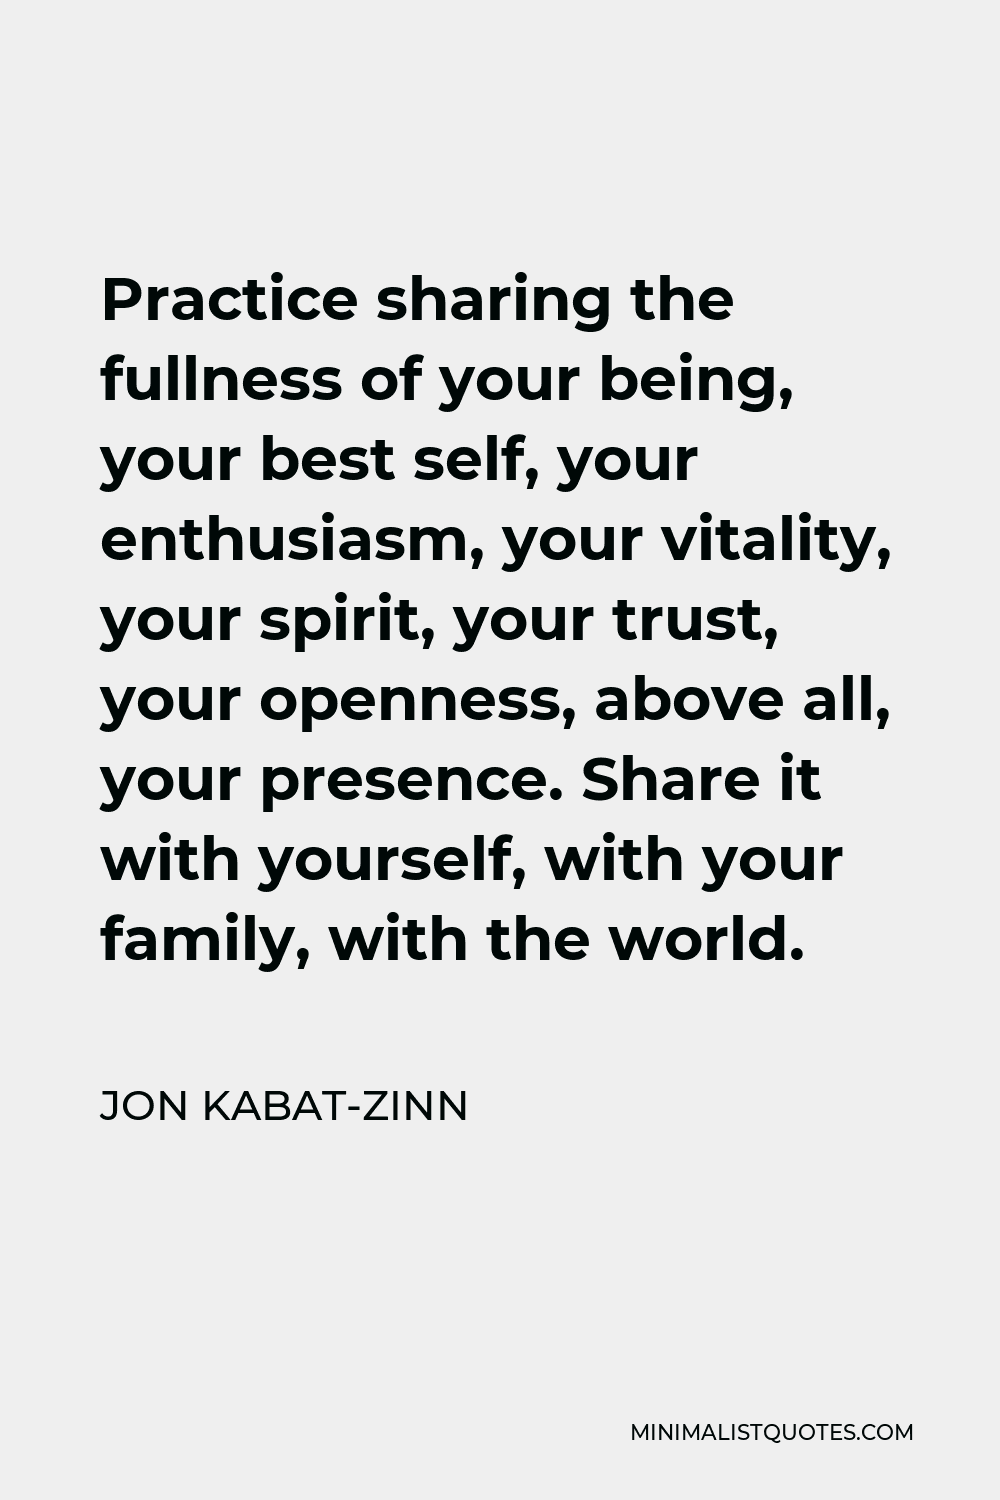 Jon Kabat-Zinn Quote - Practice sharing the fullness of your being, your best self, your enthusiasm, your vitality, your spirit, your trust, your openness, above all, your presence. Share it with yourself, with your family, with the world.